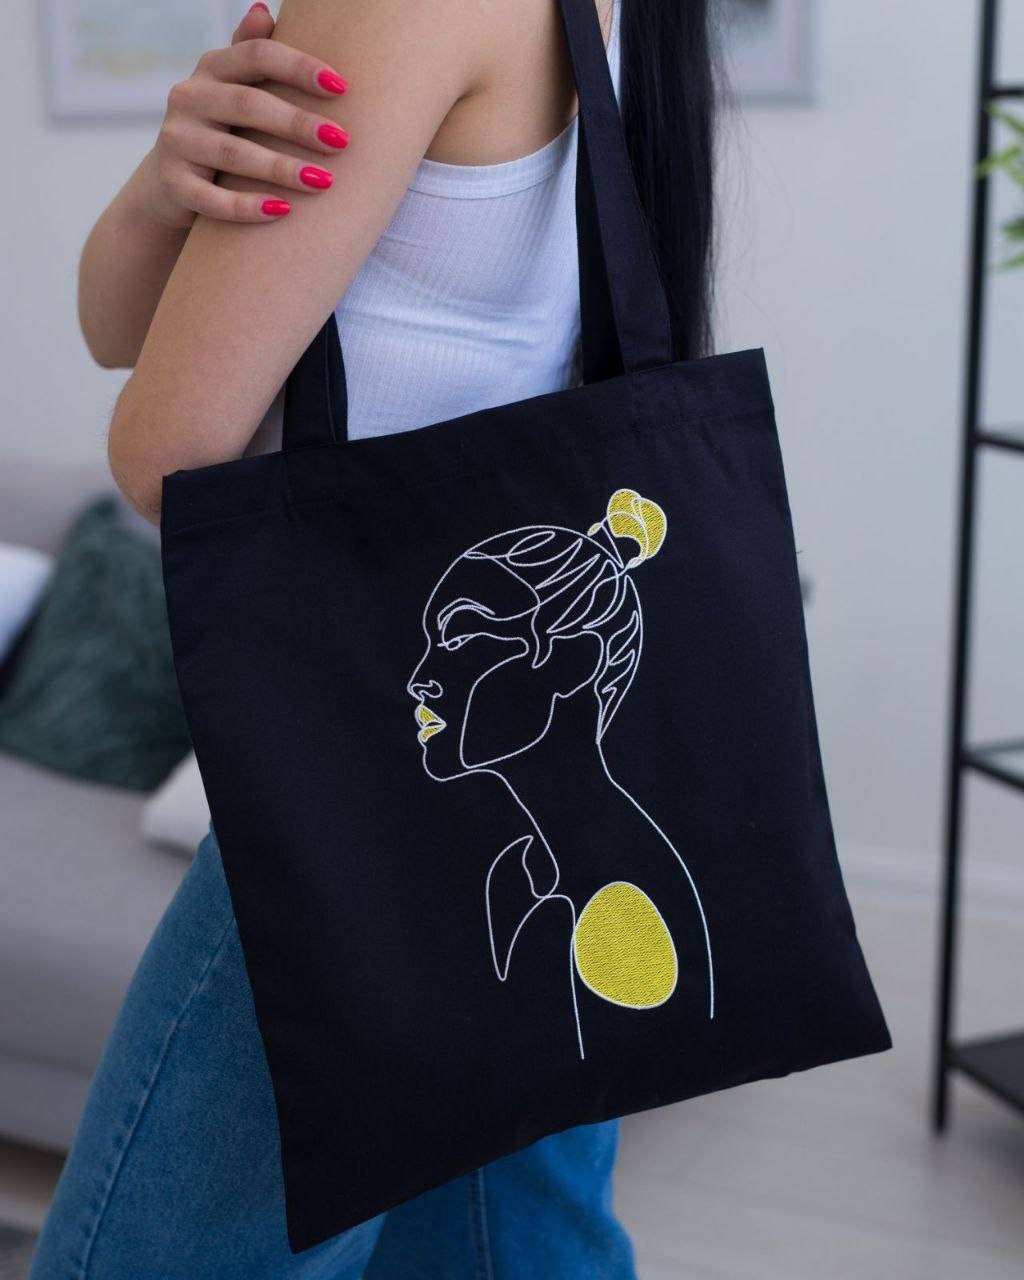 Eco bag 'Girl with yellow' 100% cotton art canvas | Etsy